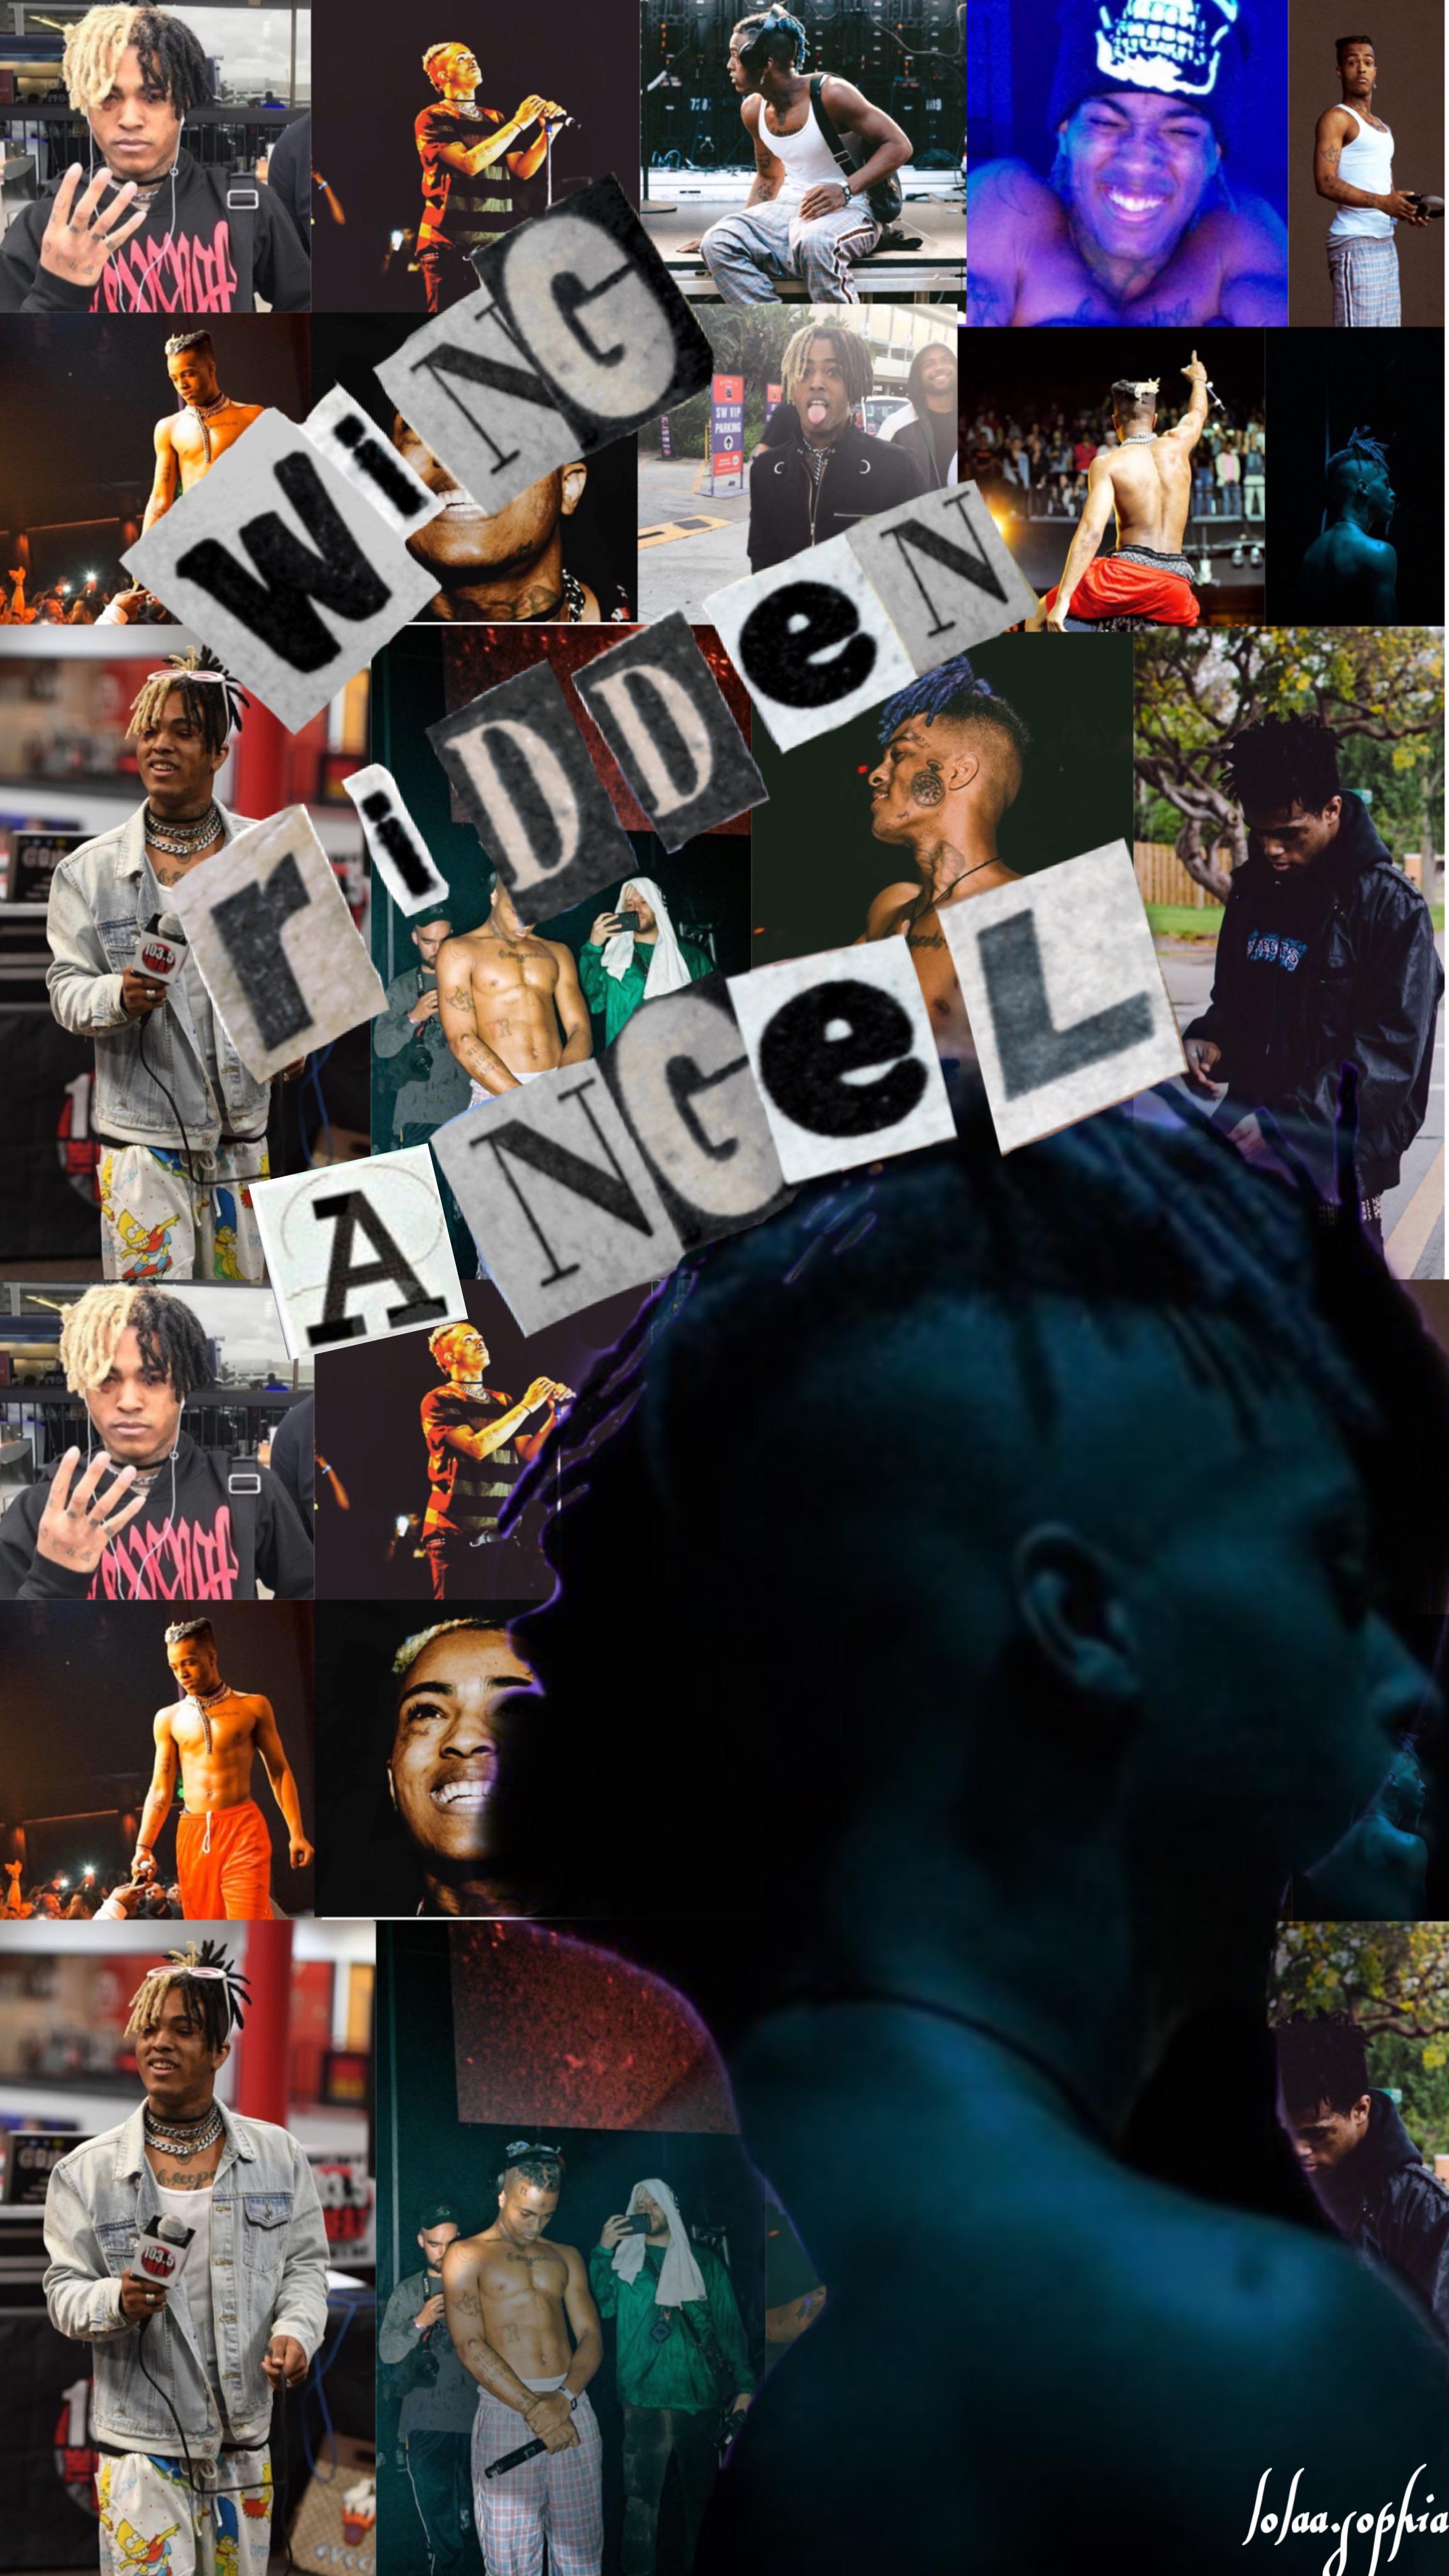 here's an x wallpaper i made. feel free to use